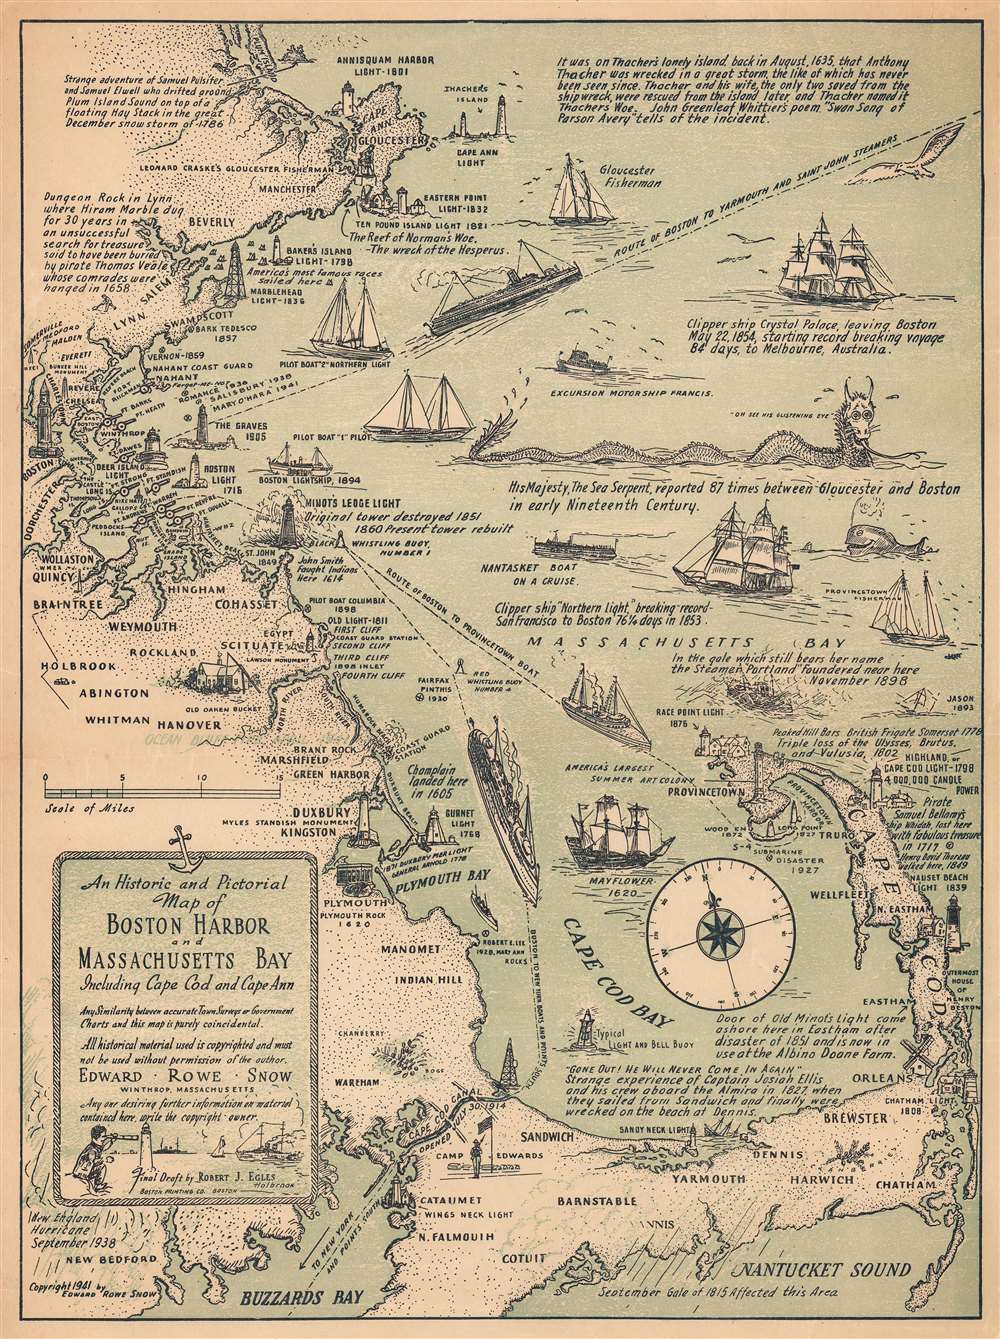 An Historic and Pictorial Map of Boston Harbor and Massachusetts Bay Including Cape Cod and Cape Ann. - Main View